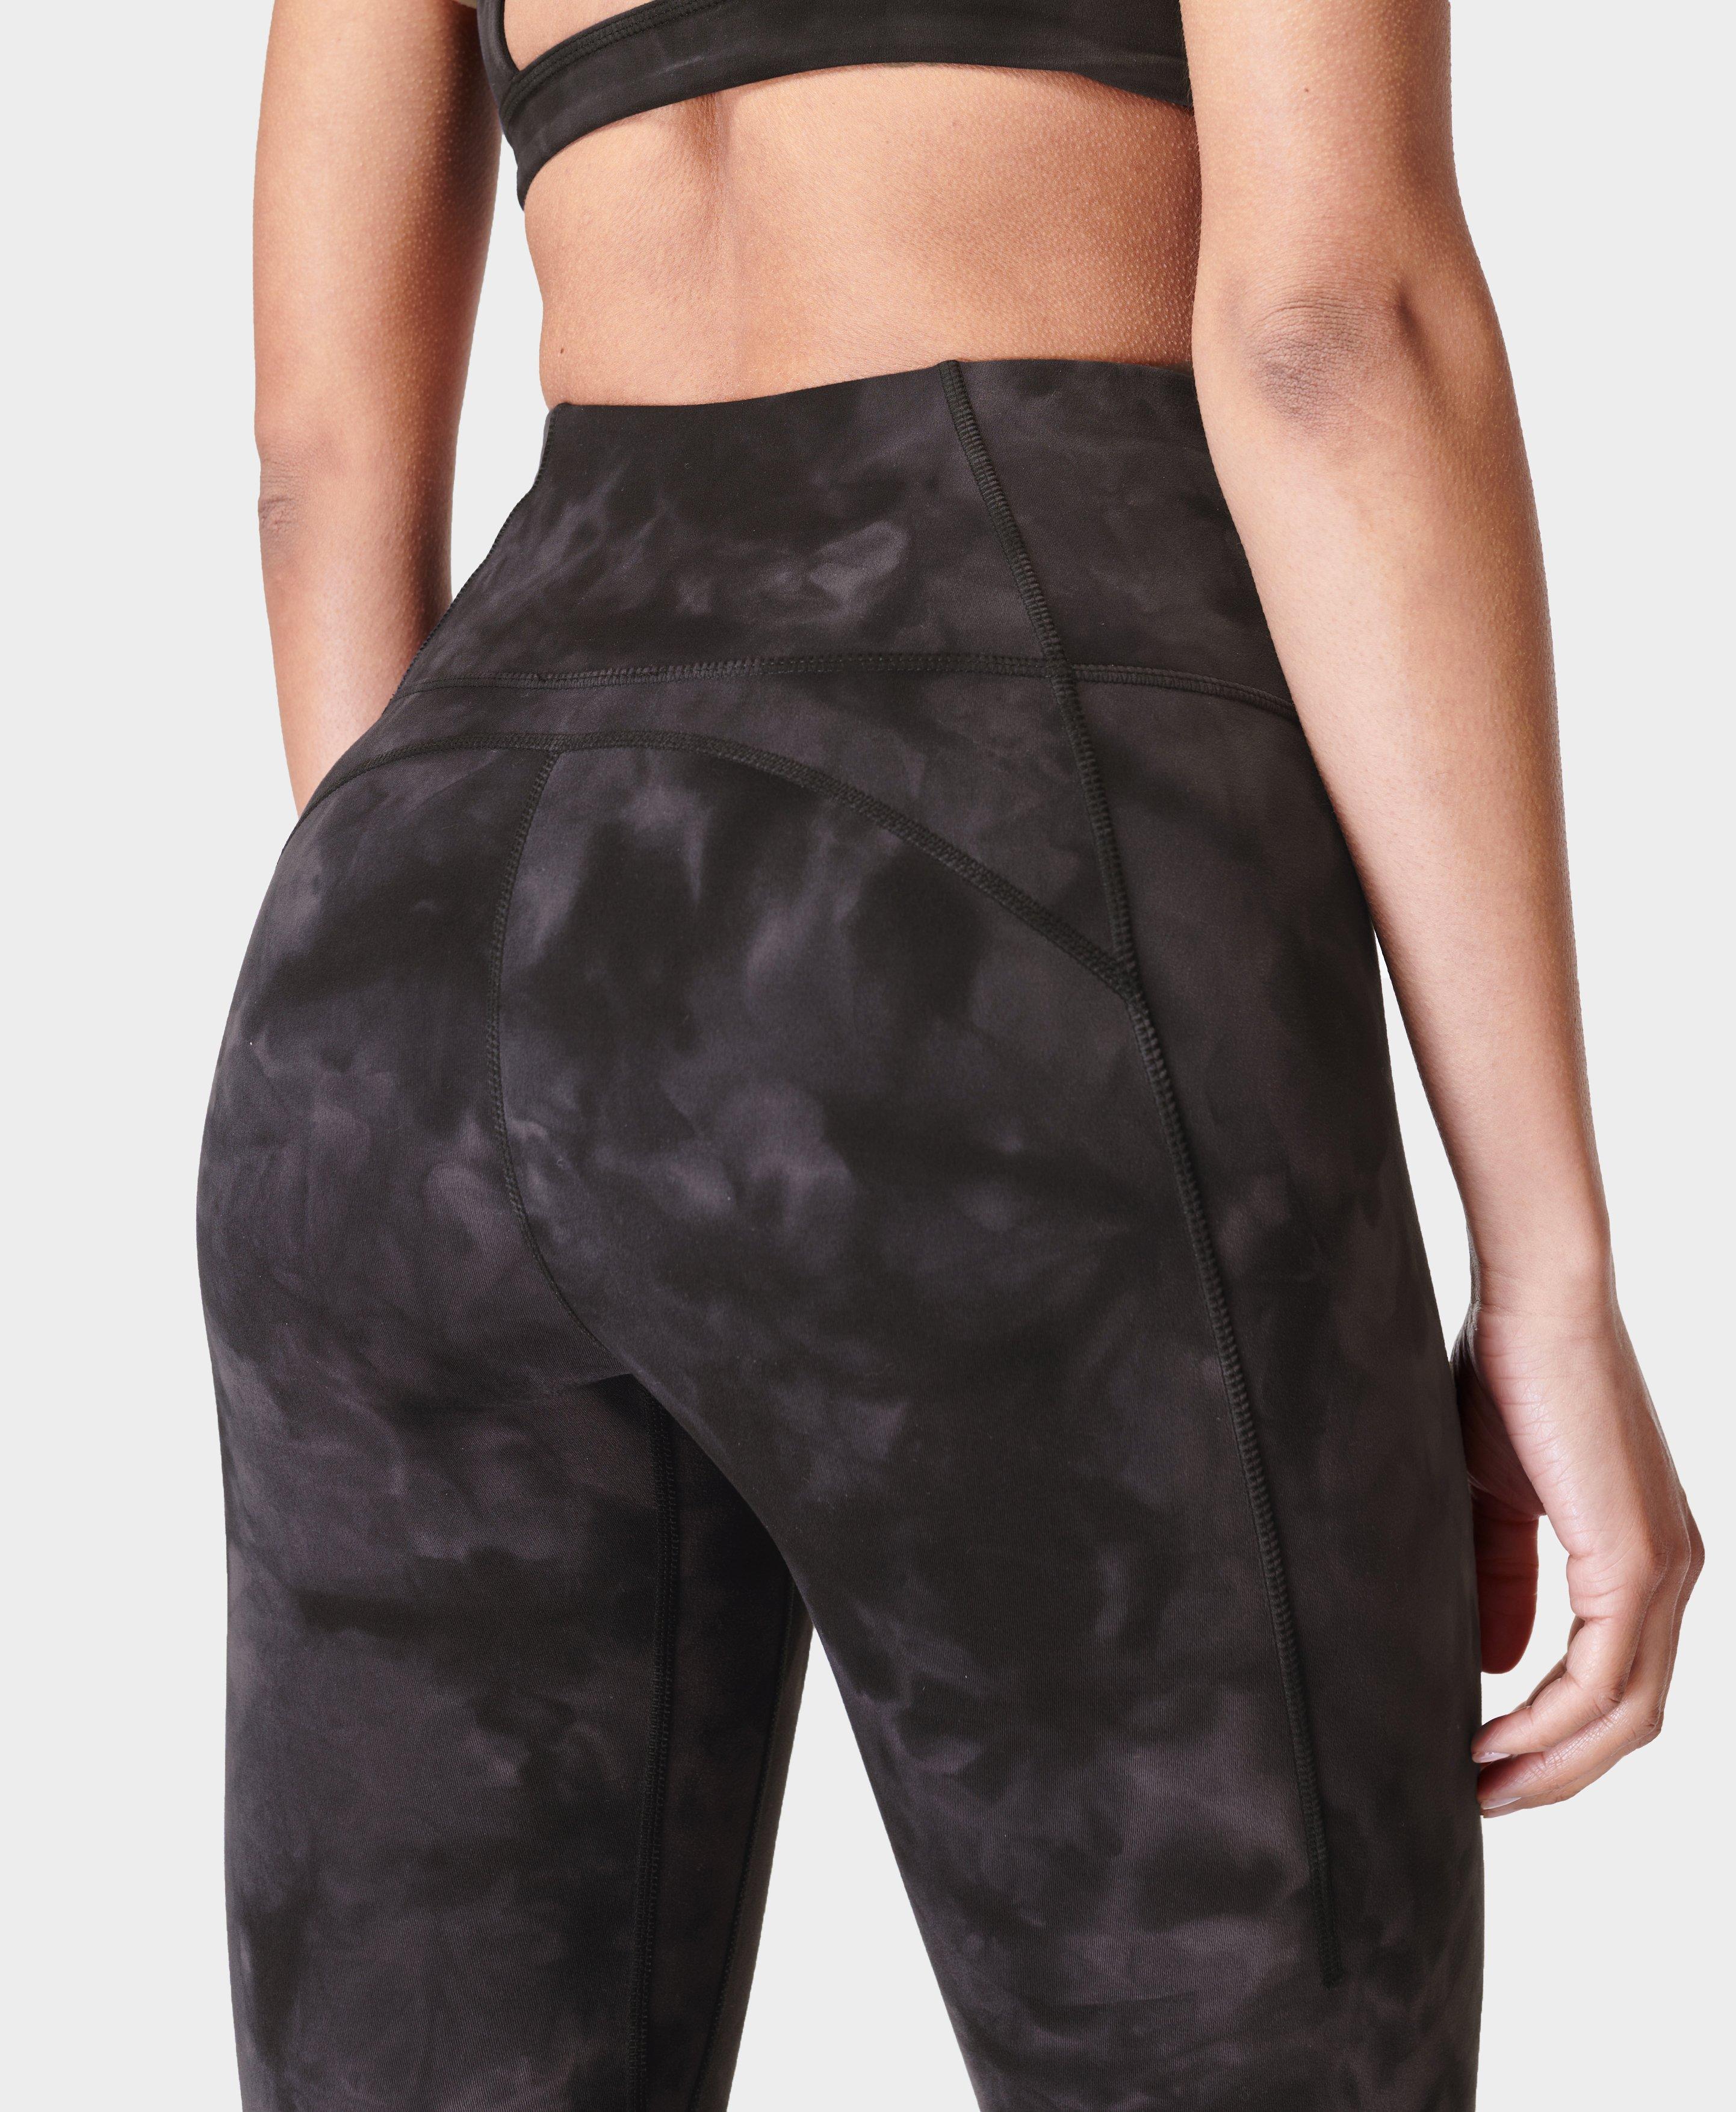 Sweaty Betty High Shine High Waisted 7/8 Leggings Black Size XS - $59 New  With Tags - From Dori